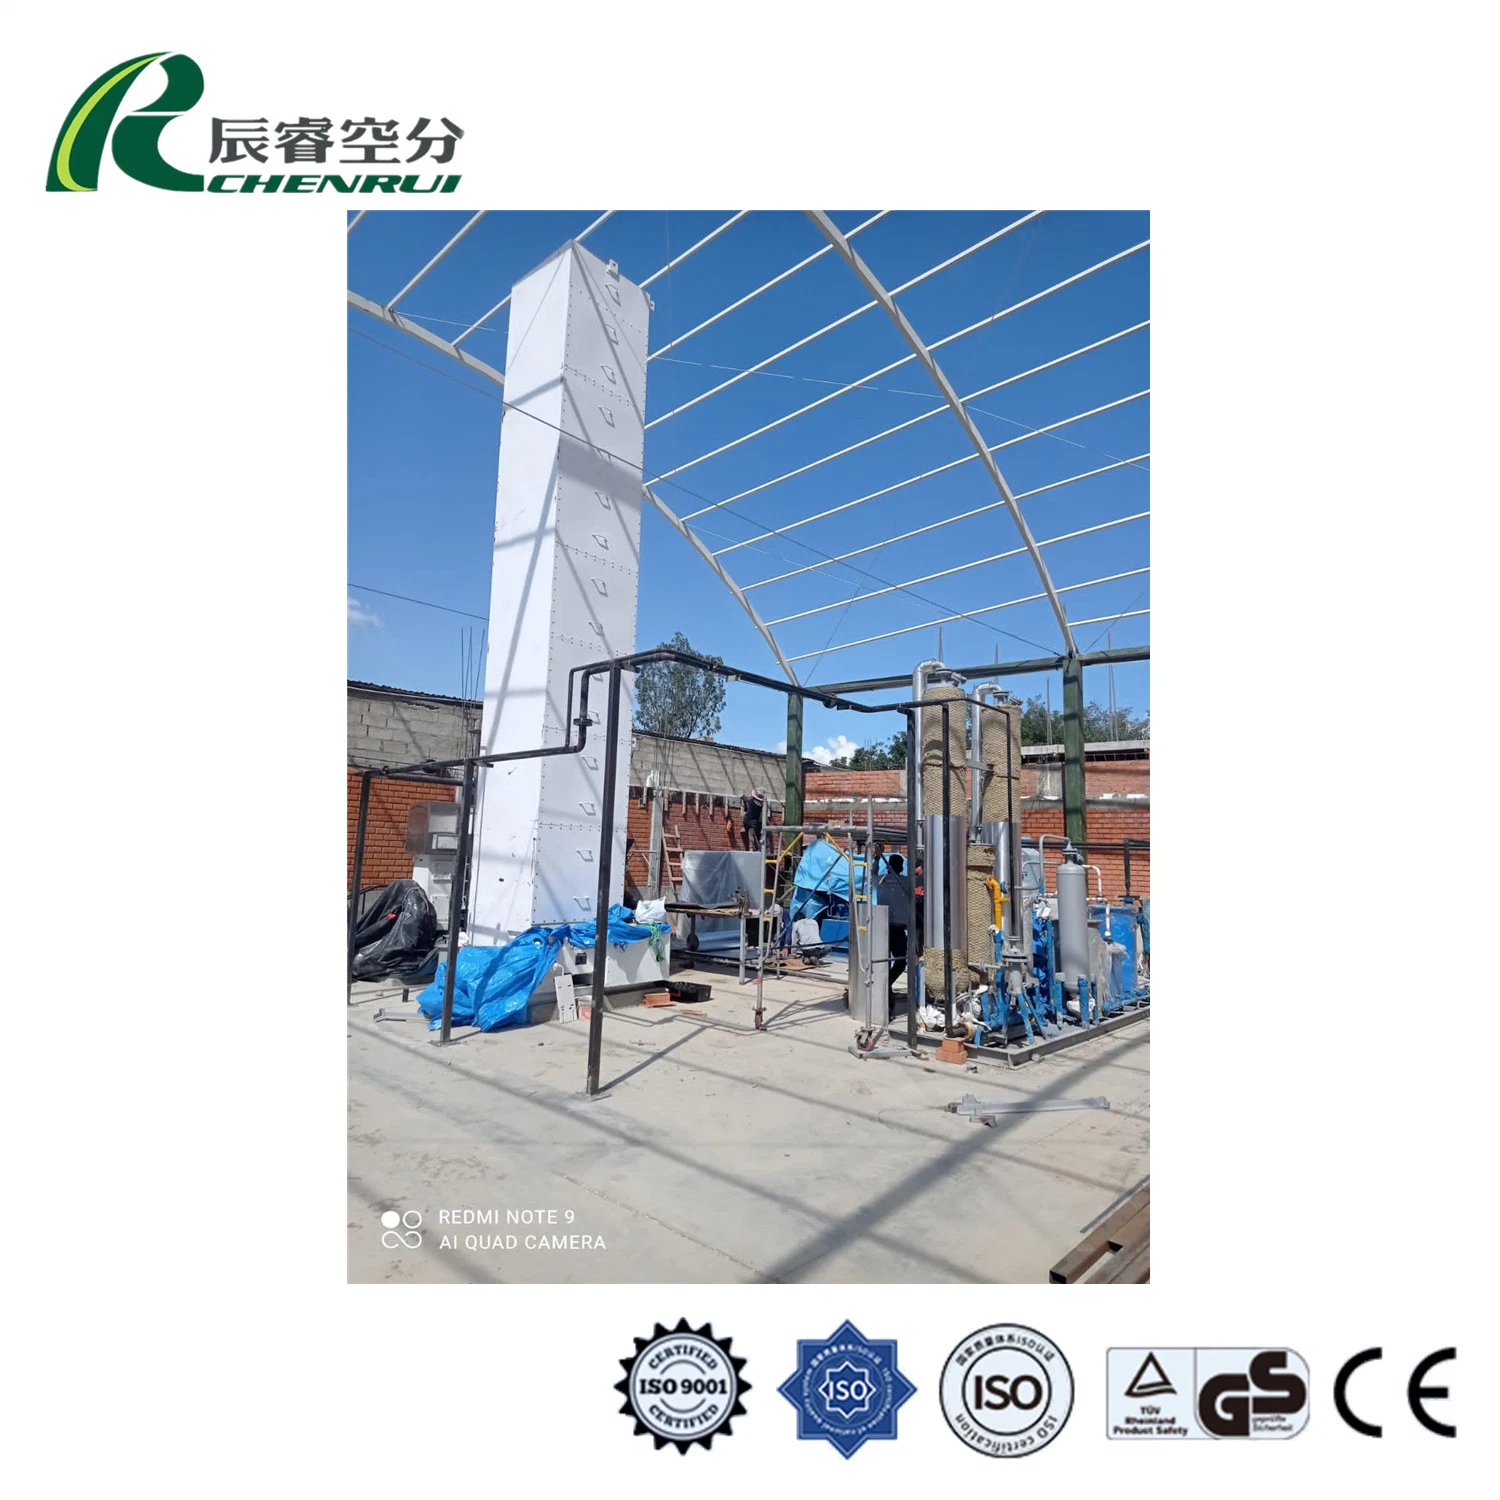 Hangzhou Chenrui Cost-Effective High-Performance Reliable Material Industry Nitrogen Generator